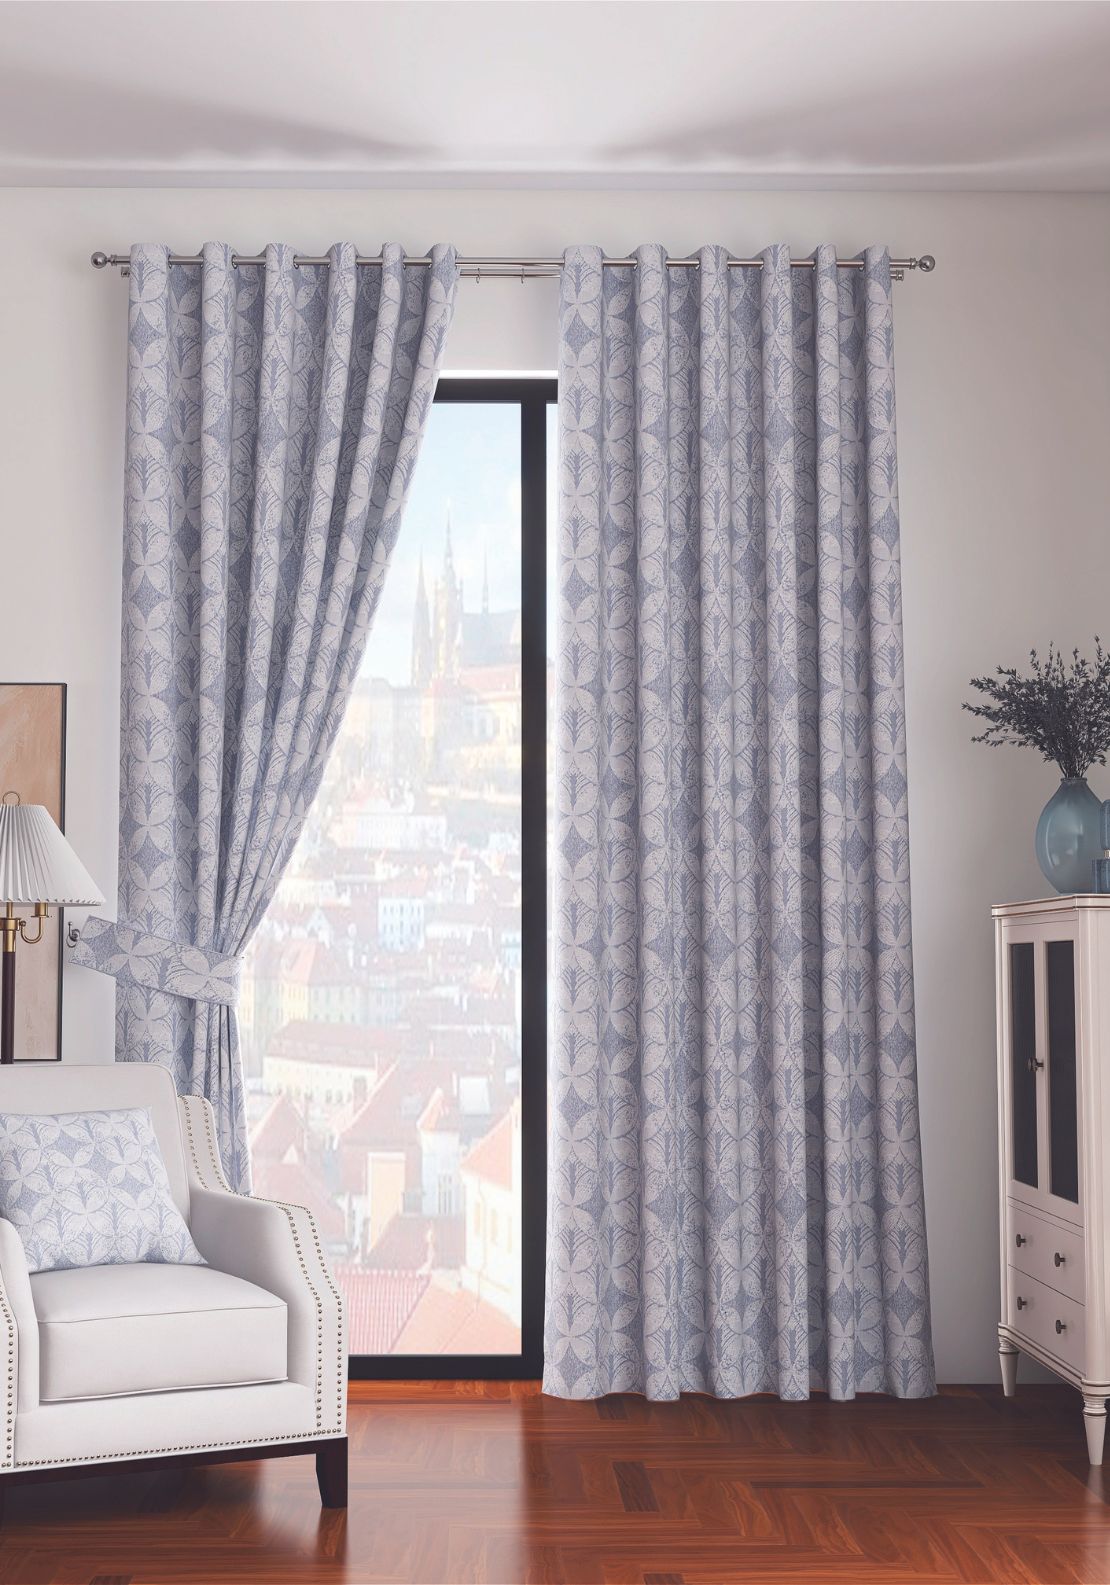 The Home Collection Brittany Readymade Curtain - Denim 1 Shaws Department Stores